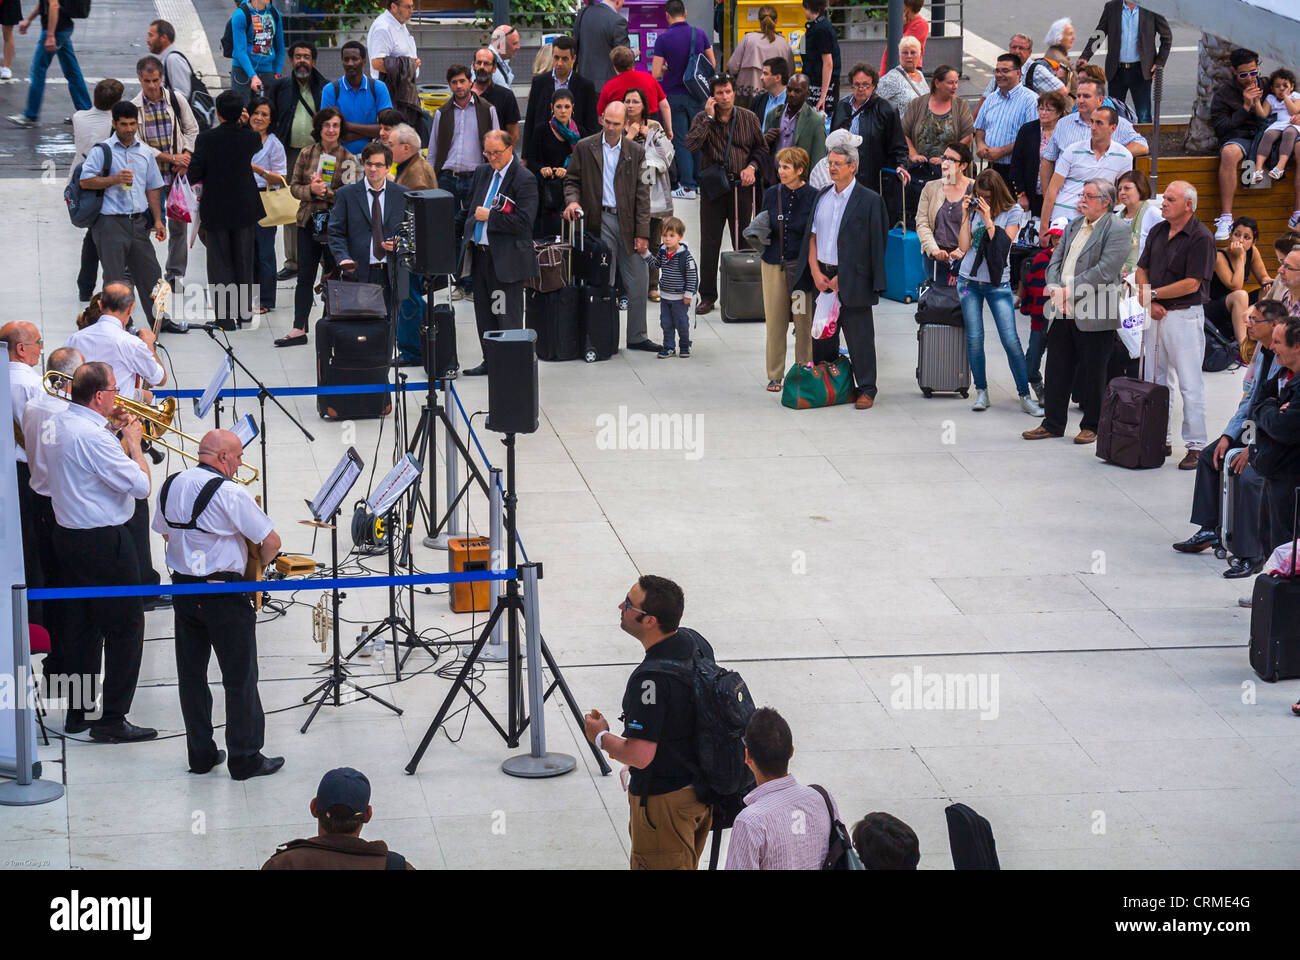 Paris, France, Audience Crowd, Watching, New Orleans Jazz Band, Orchestra Performing in Train Station, 'Gare de Lyon', National Music Festival, Fete de la Musique, American Jazz Music Concert Stock Photo